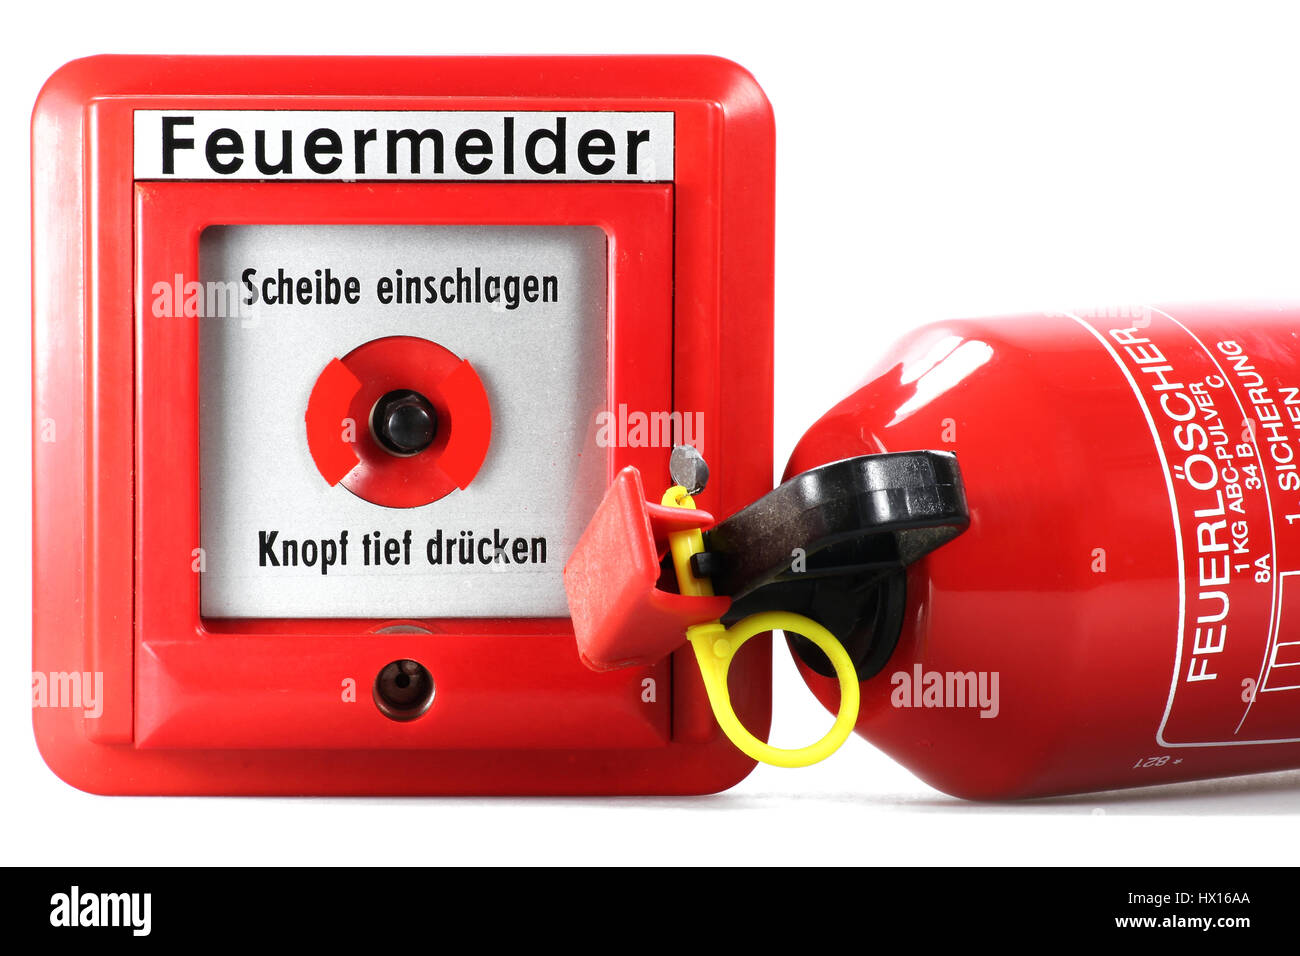 German push-button fire alarm isolated on white background Stock Photo